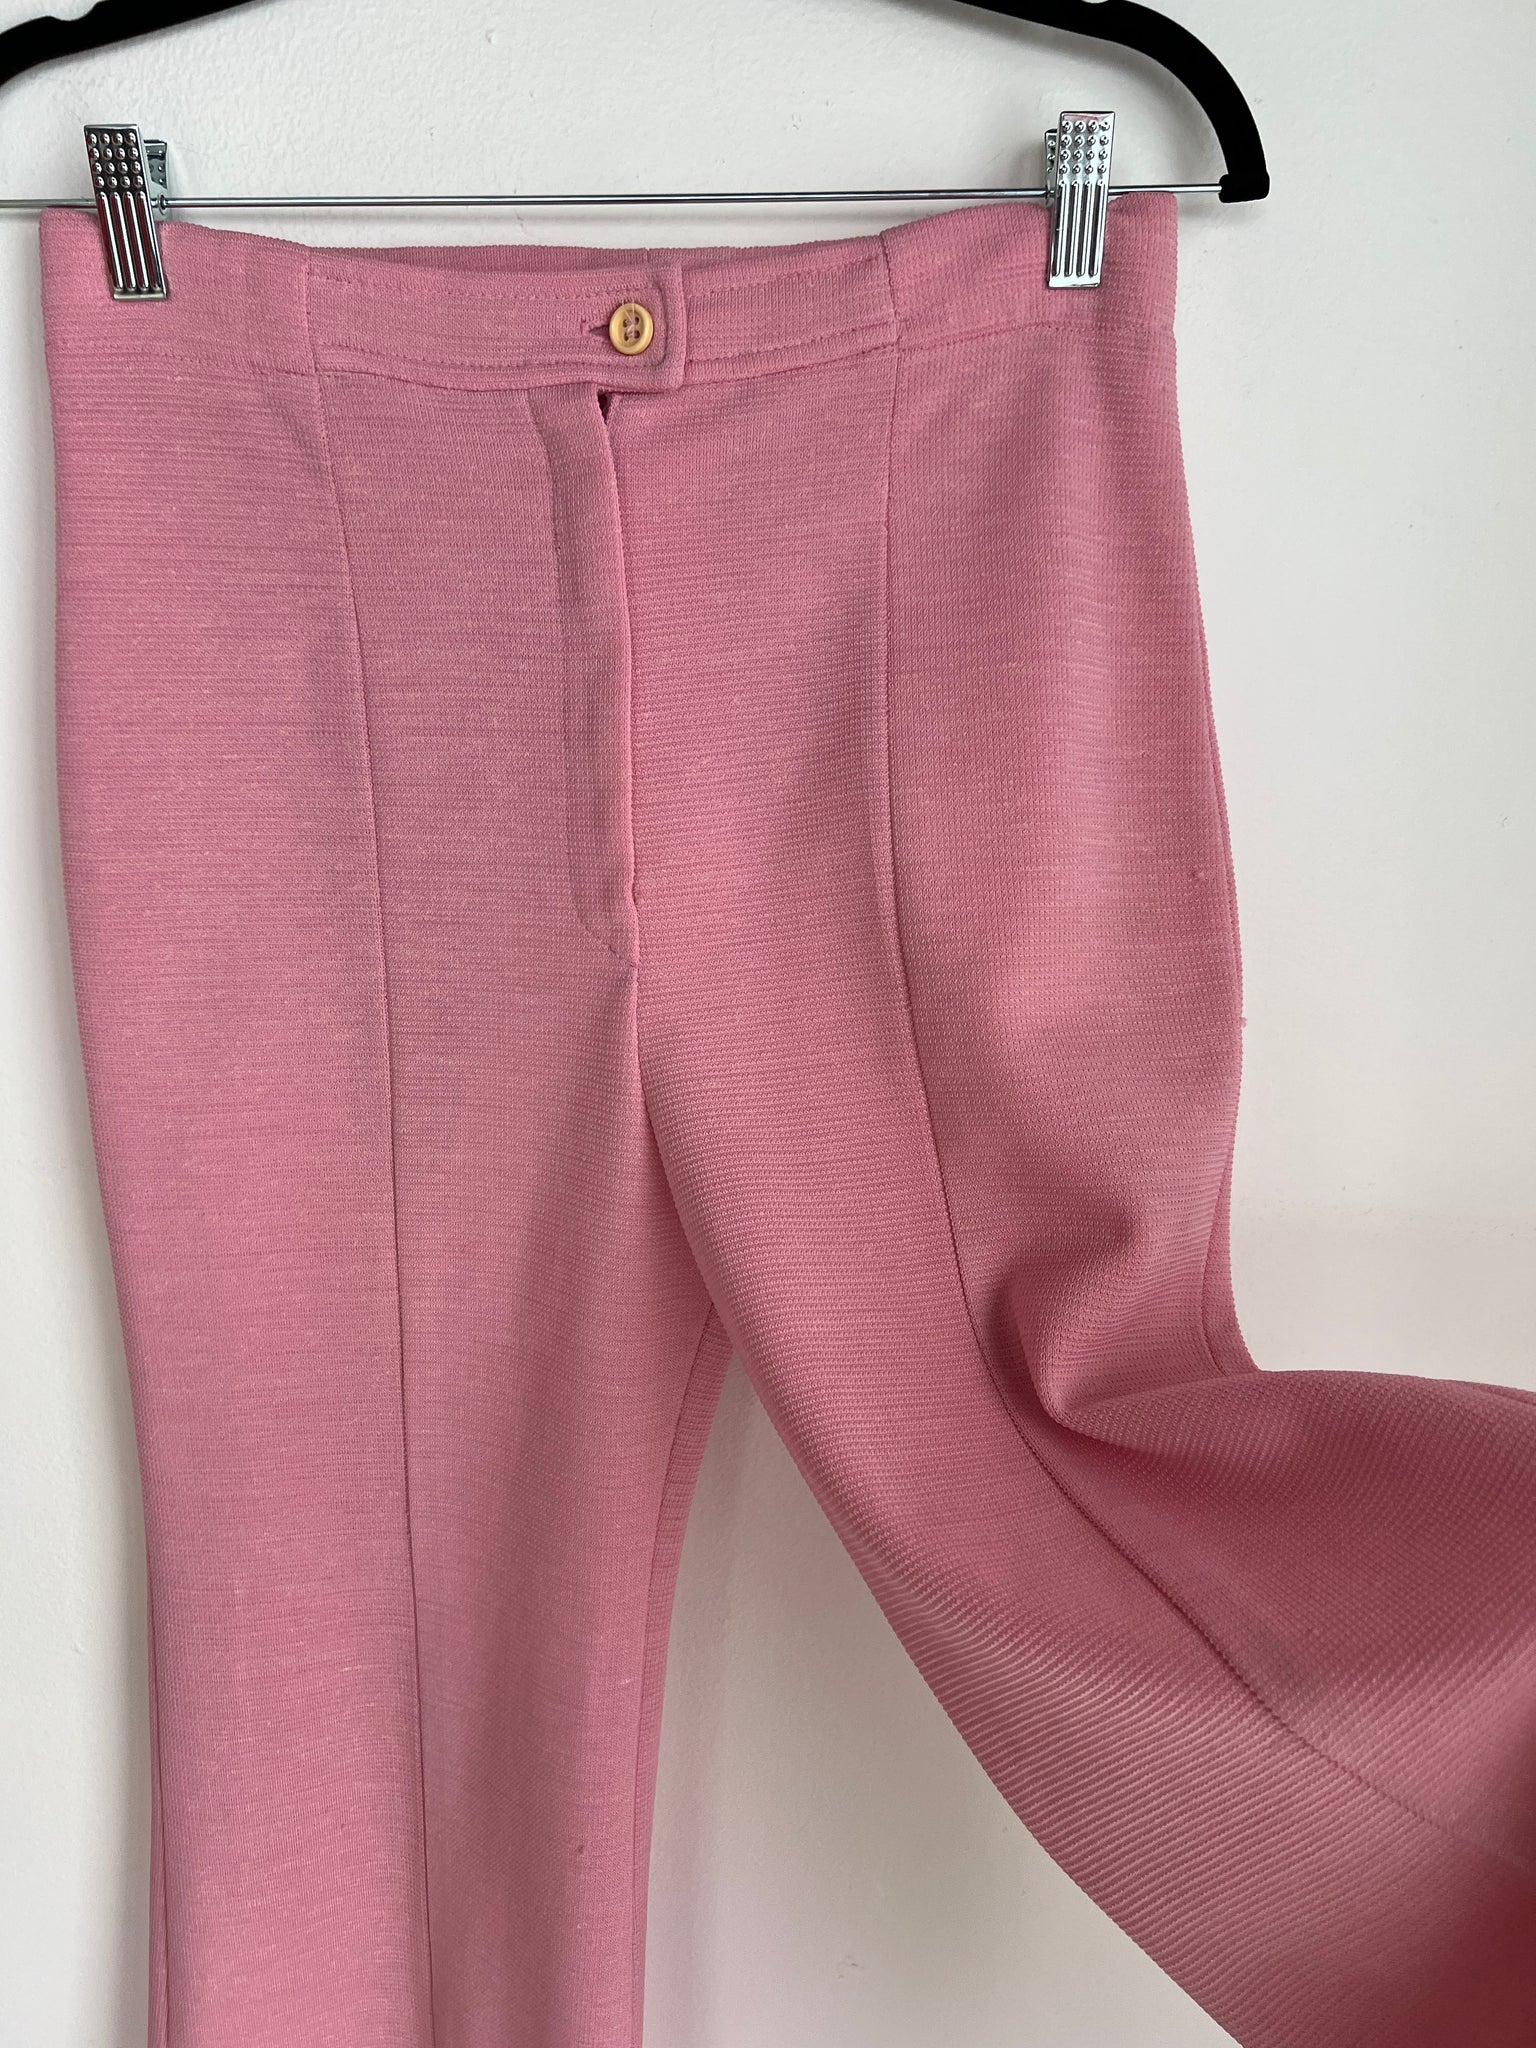 1970s PANTS- pink poly bellbottoms